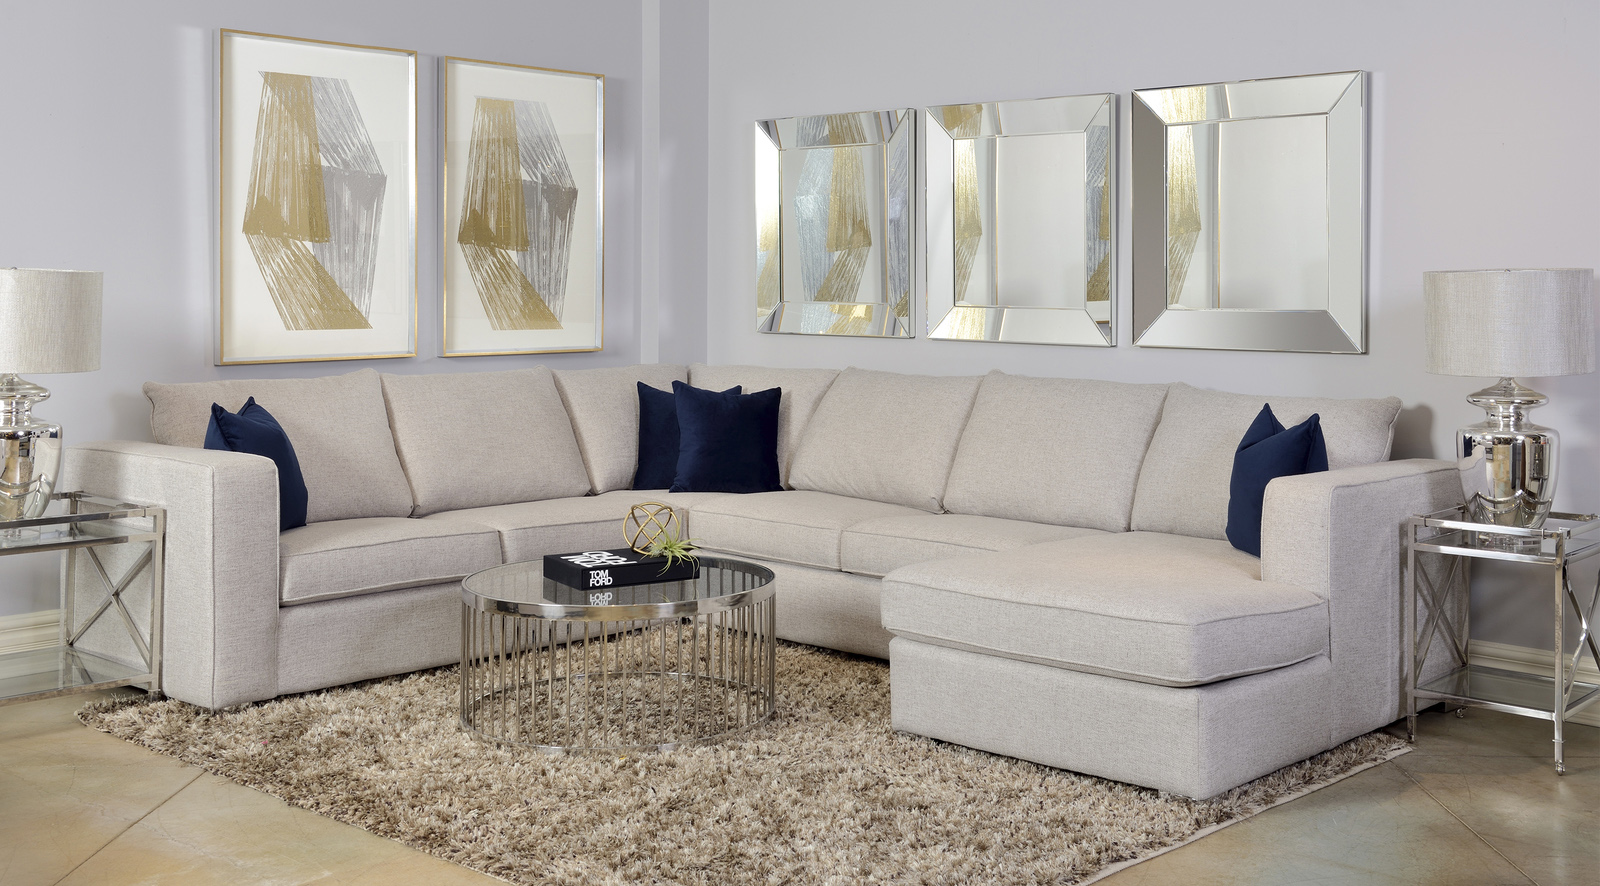 Online Canadian Furniture pick from Decor-rest. A cream sectional with chaise and toss pillows in a finished living room setting.